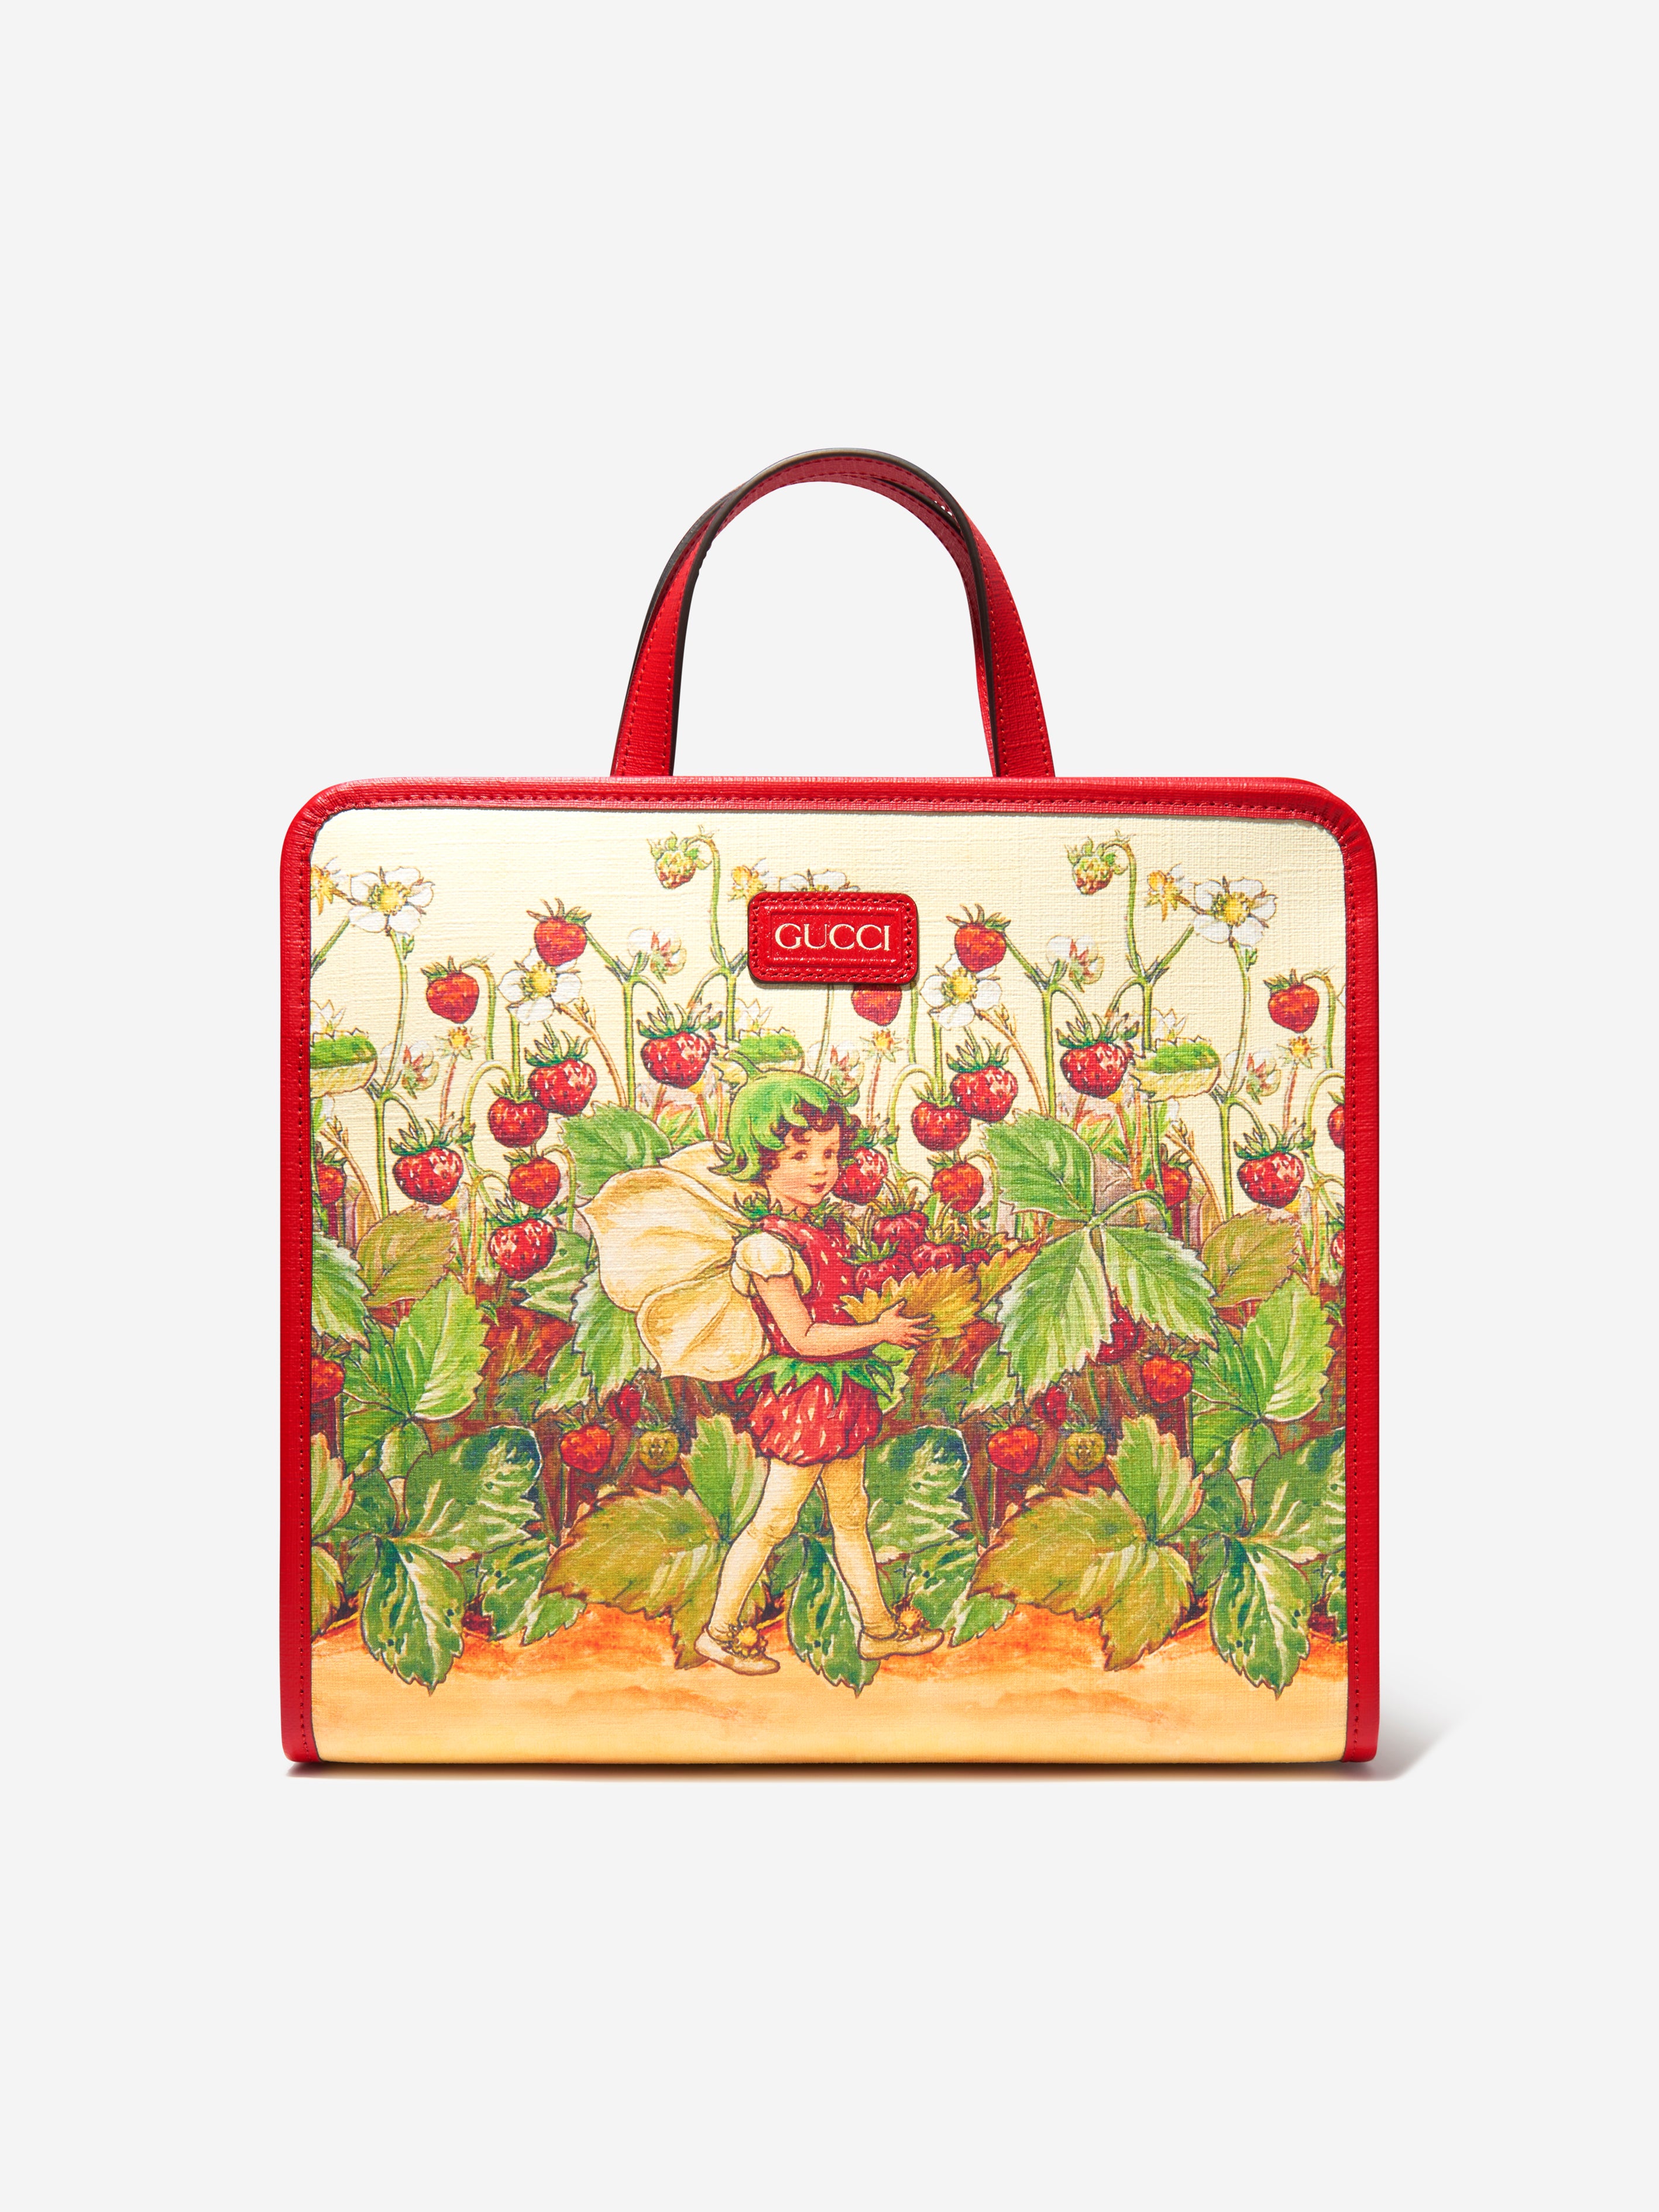 Gucci Floral Tote Bags